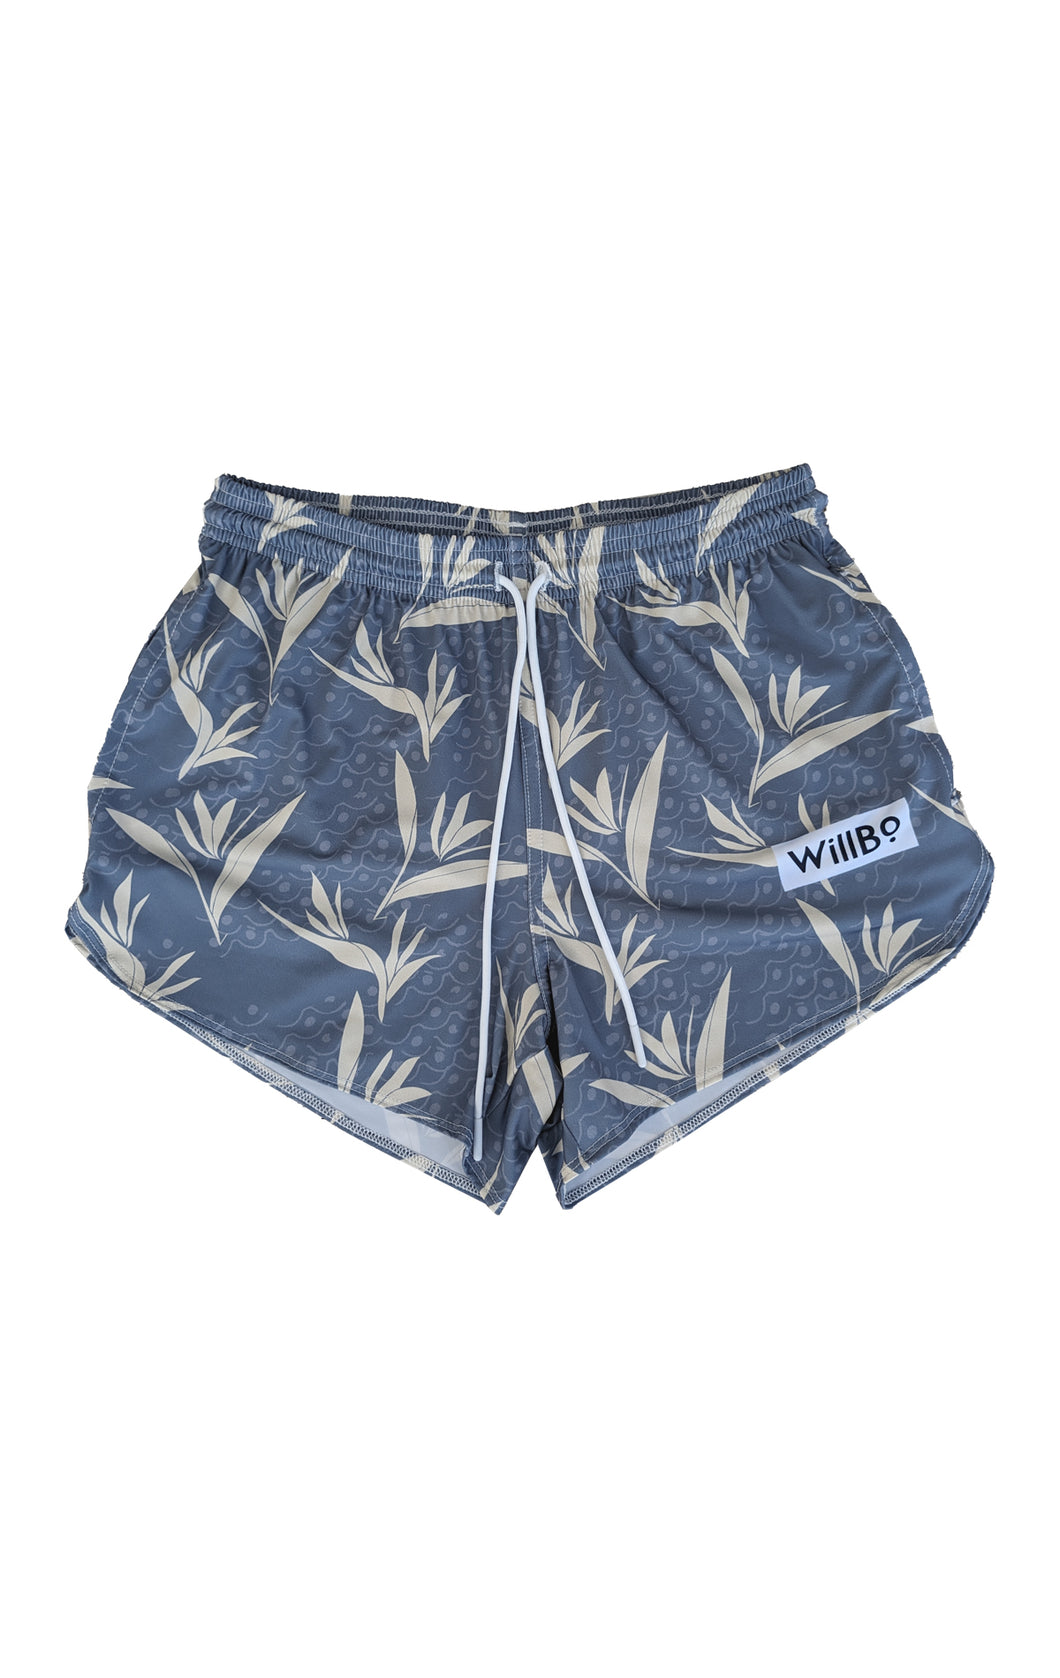 Sideout x Willbo Women's Birds of Paradise Volley Short